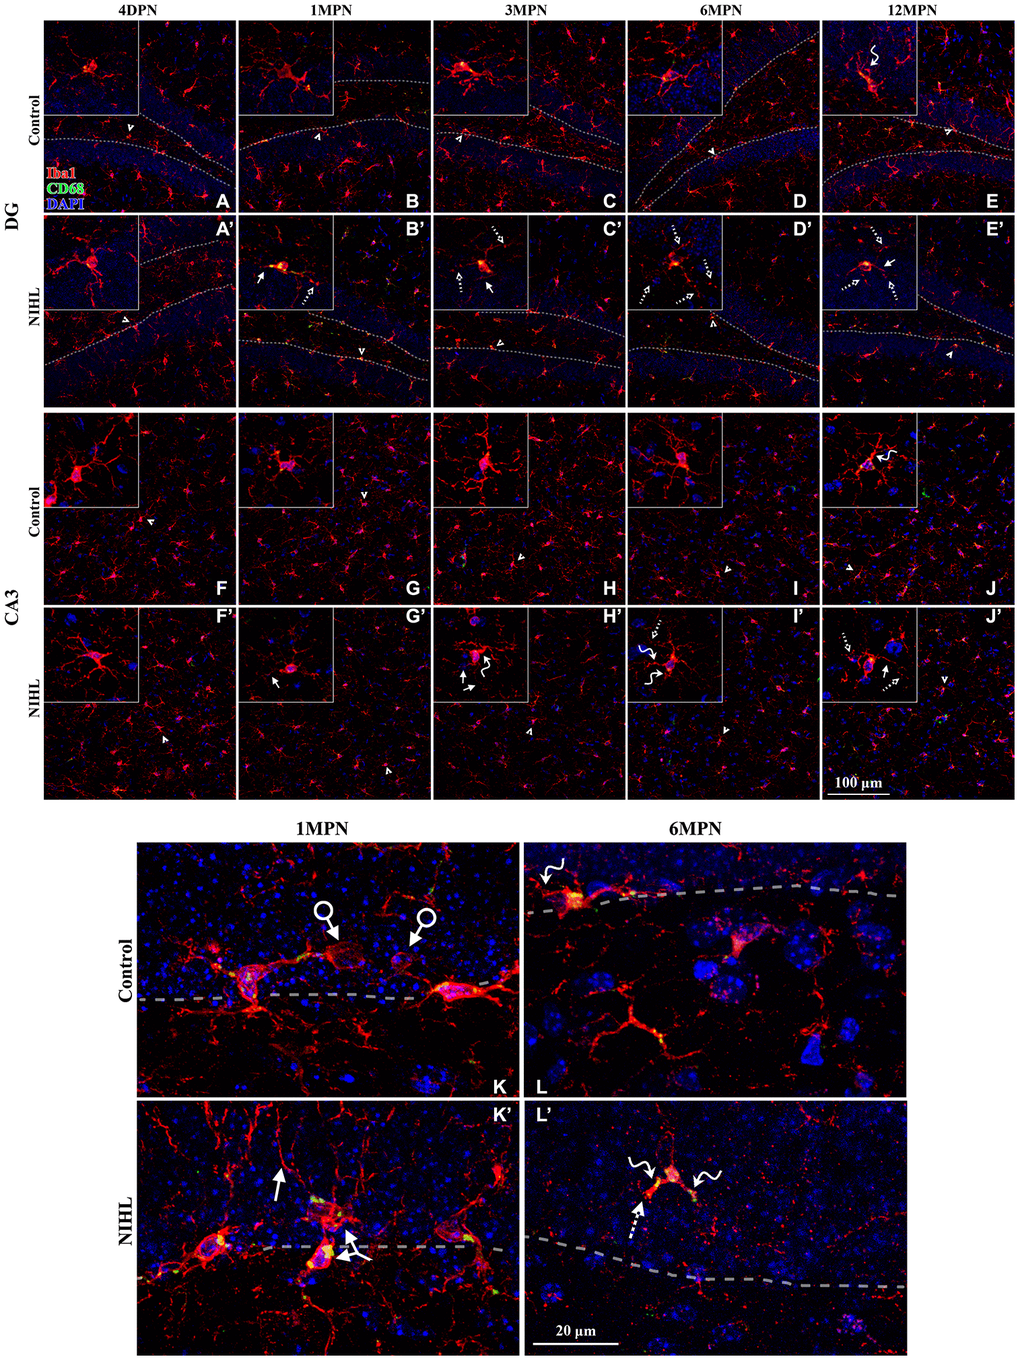 Microglial deterioration in the hippocampus associated with normal aging is aggravated by NIHL. (A–J’) Representative z-projection images of cells labeled with Iba1 (red), CD68 (green), and DAPI (blue) in the DG (A–E’) and CA3 (F–J’). Dotted lines in (A–E’) depict the SGZ (region between the granule cell layer and hilus). Iba1+ cells signified by arrowheads are magnified in the corresponding inserts. Scale bar equals 100 μm. (K–L’) Representative magnified images of Iba1-labeled cells in the DG from both groups at 1 MPN (K–K’) and 6 MPN (L–L’). Dotted lines depict the SGZ. Dystrophic cells are readily distinguished from ramified cells by degenerative changes in their cytoplasmic structure, such as deramified/atrophic cells (solid line arrows in B’, C’, E’, J’, H’, J’, and K’), fragmented or unusually tortuous processes (wavy arrows in E, J, H’, I’, L, and L’), and the formation of fragmented or beaded processes (dotted arrows in B’, C’, D’, E’, I’, J’, and L’). Arrows with circles in (K) point to microglial phagocytic pouches, a special modification of the microglial process involved in removing apoptotic cells from the adult SGZ neurogenic niche [27, 28]. The two-headed arrow in (K’) points to two abnormally aggregated microglial cells. Scale bar equals 20 μm.